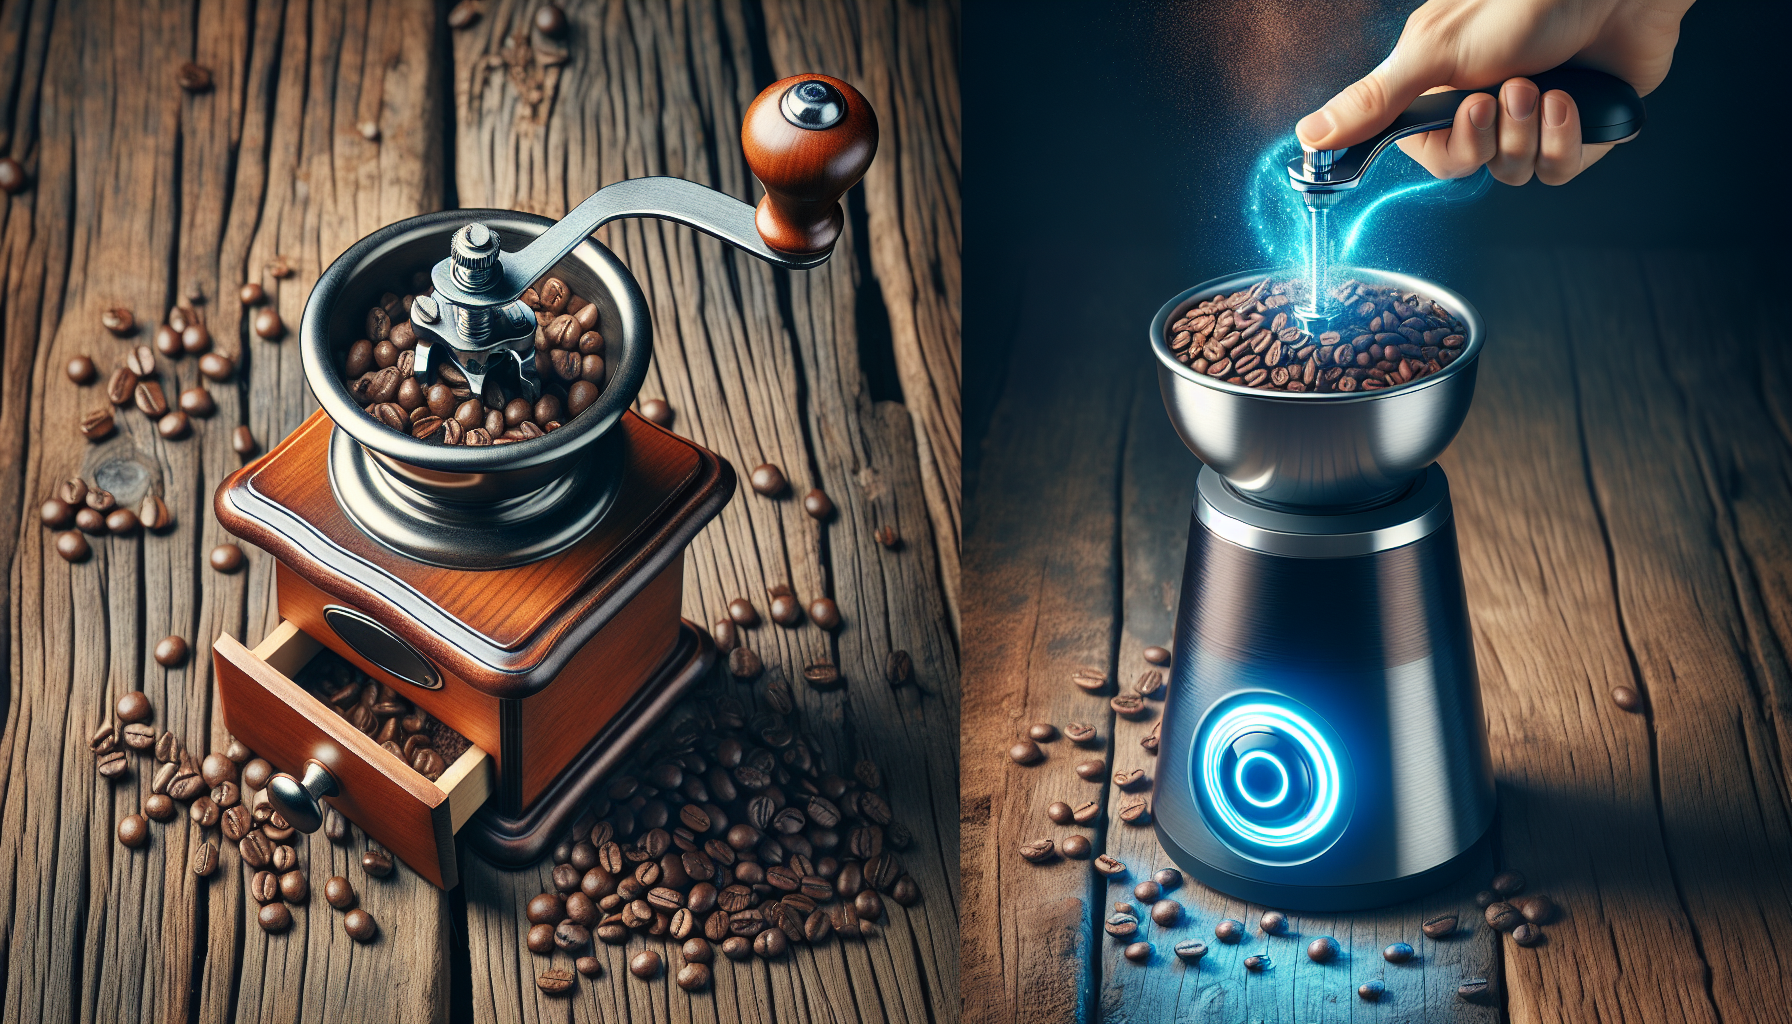 Comparison of manual and electric coffee grinders